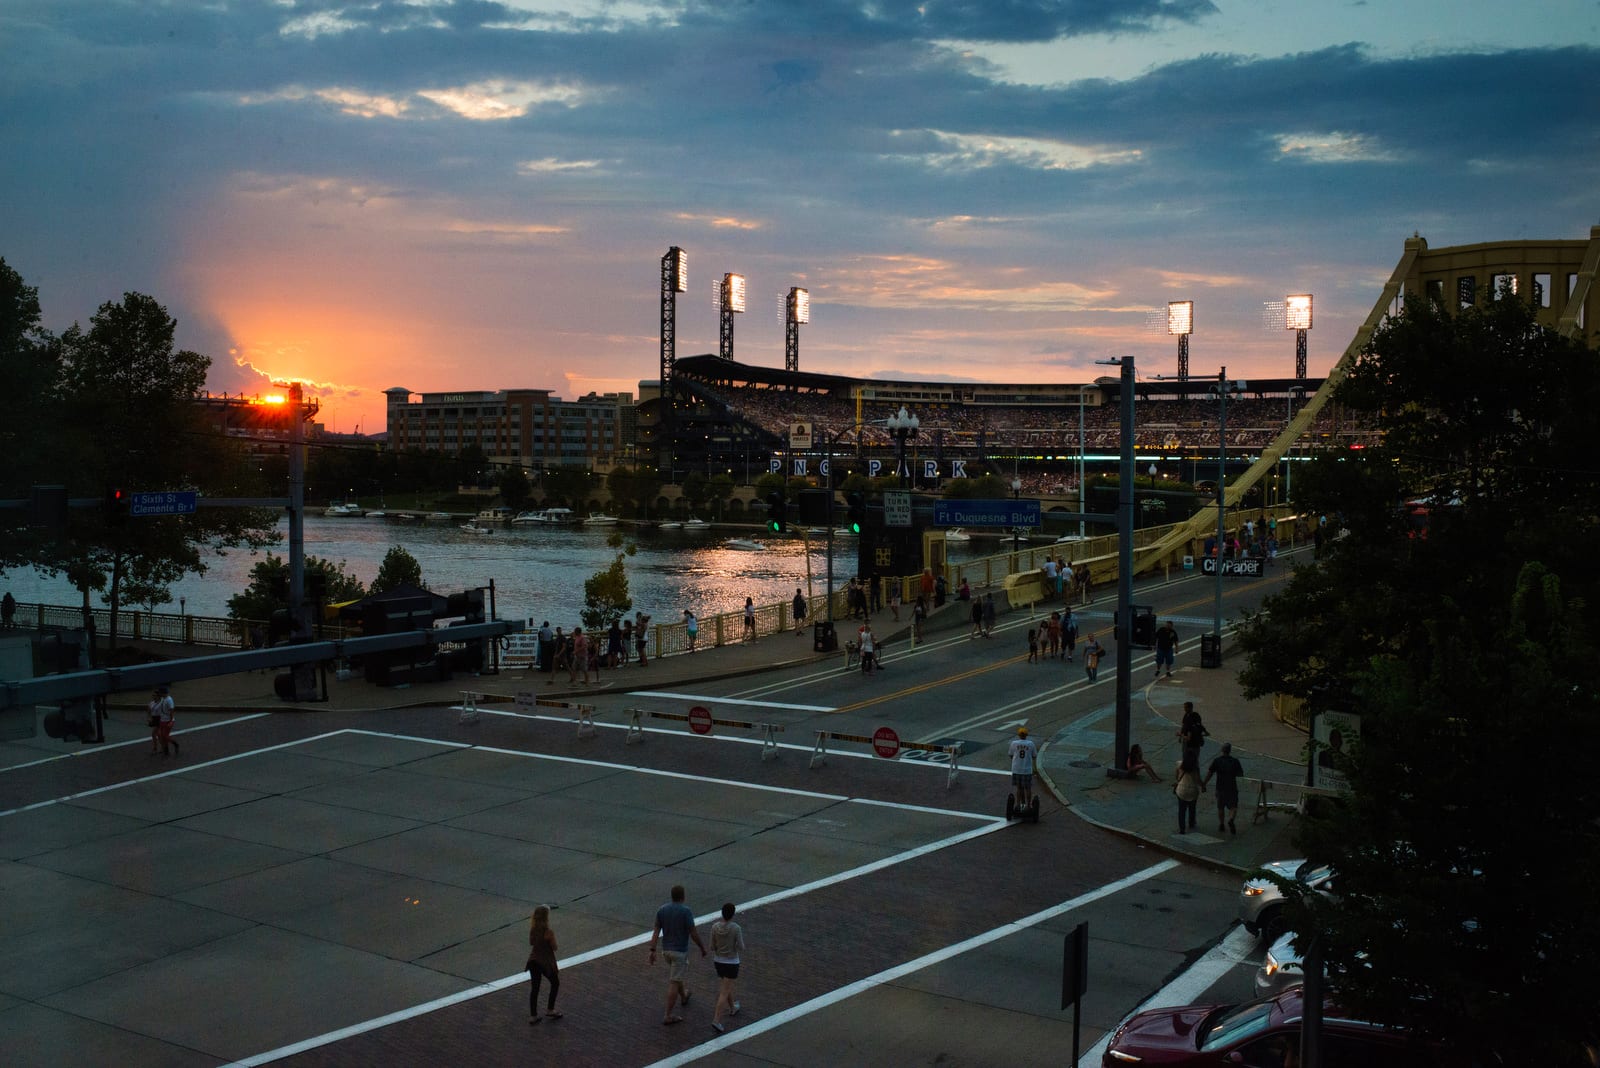 The sun sets behind PNC Park on the North Shore of the Allegheny River in Pittsburgh.